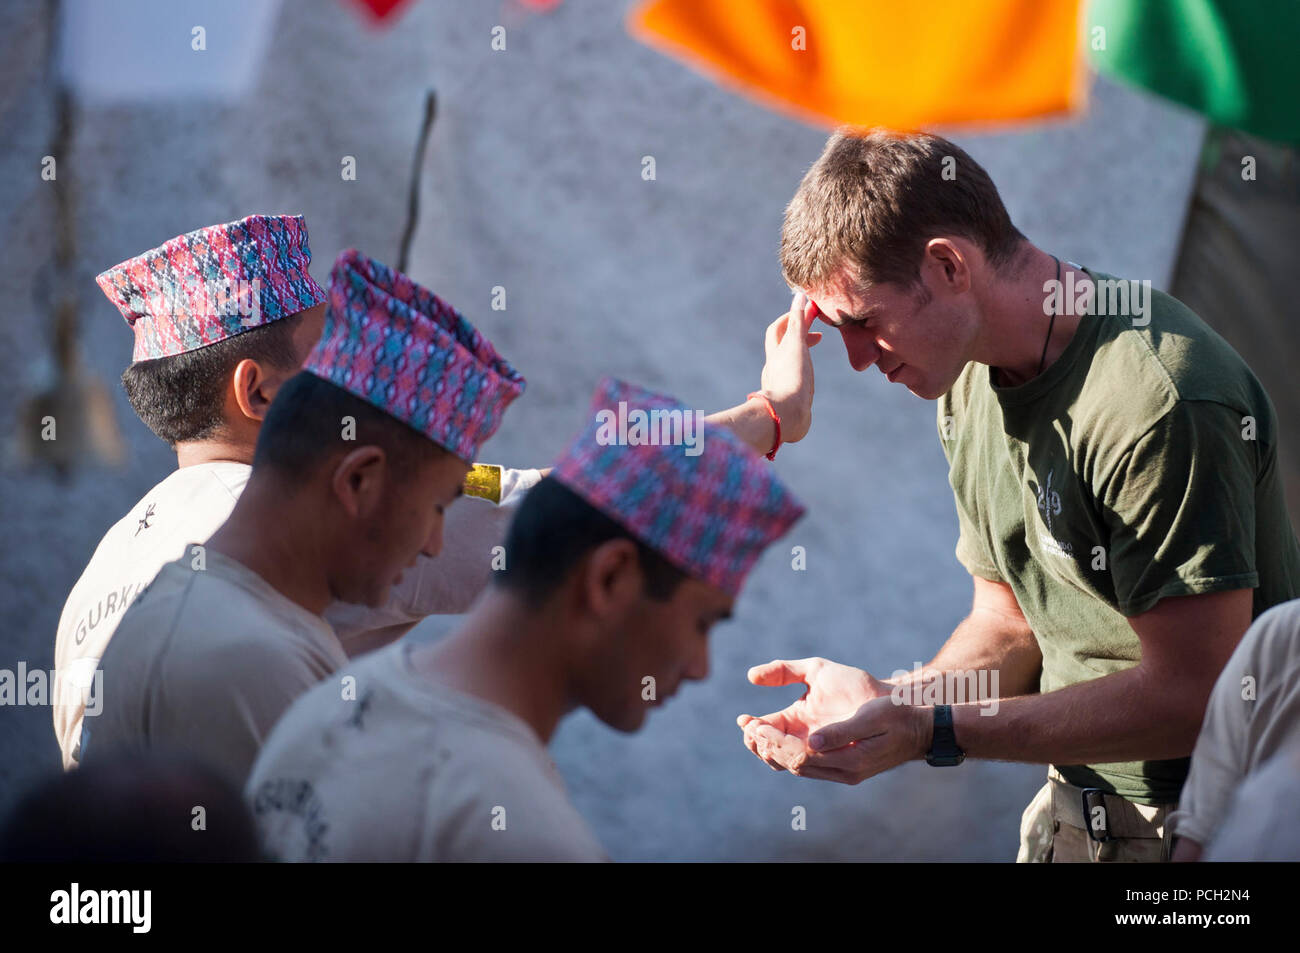 A Nepalese soldier from the Royal Gurkha Rifles regiment of the British army, Brigade of Gurkhas blesses a British soldier during the holy festival of Dashain, at Lashkar Gah district, Helmand province, Sept. 24. The Royal Gurkha Rifles are the only Gurkha unit in the British army. Dashain, a 15-day Nepalese national and religious-festival, and is the country????????s longest and most auspicious festival. Dashain commemorates the victories of the goddess Durga over the demon Mahisasur, goddess Durga is worshiped throughout the kingdom as the divine mother goddess. Stock Photo